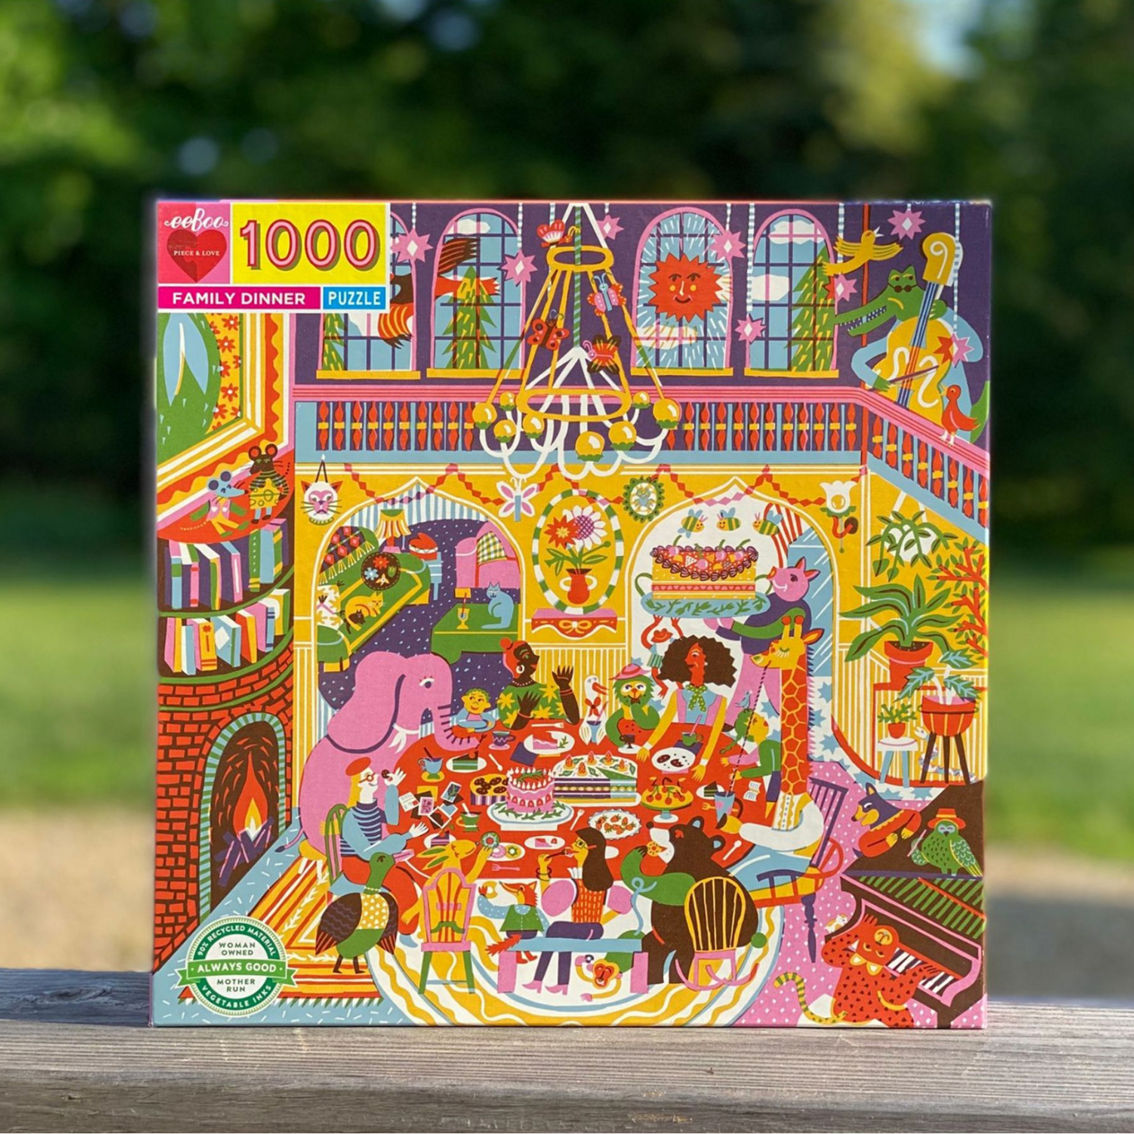 Family Dinner Night Square Jigsaw Puzzle 1000 pc. - Image 5 of 6